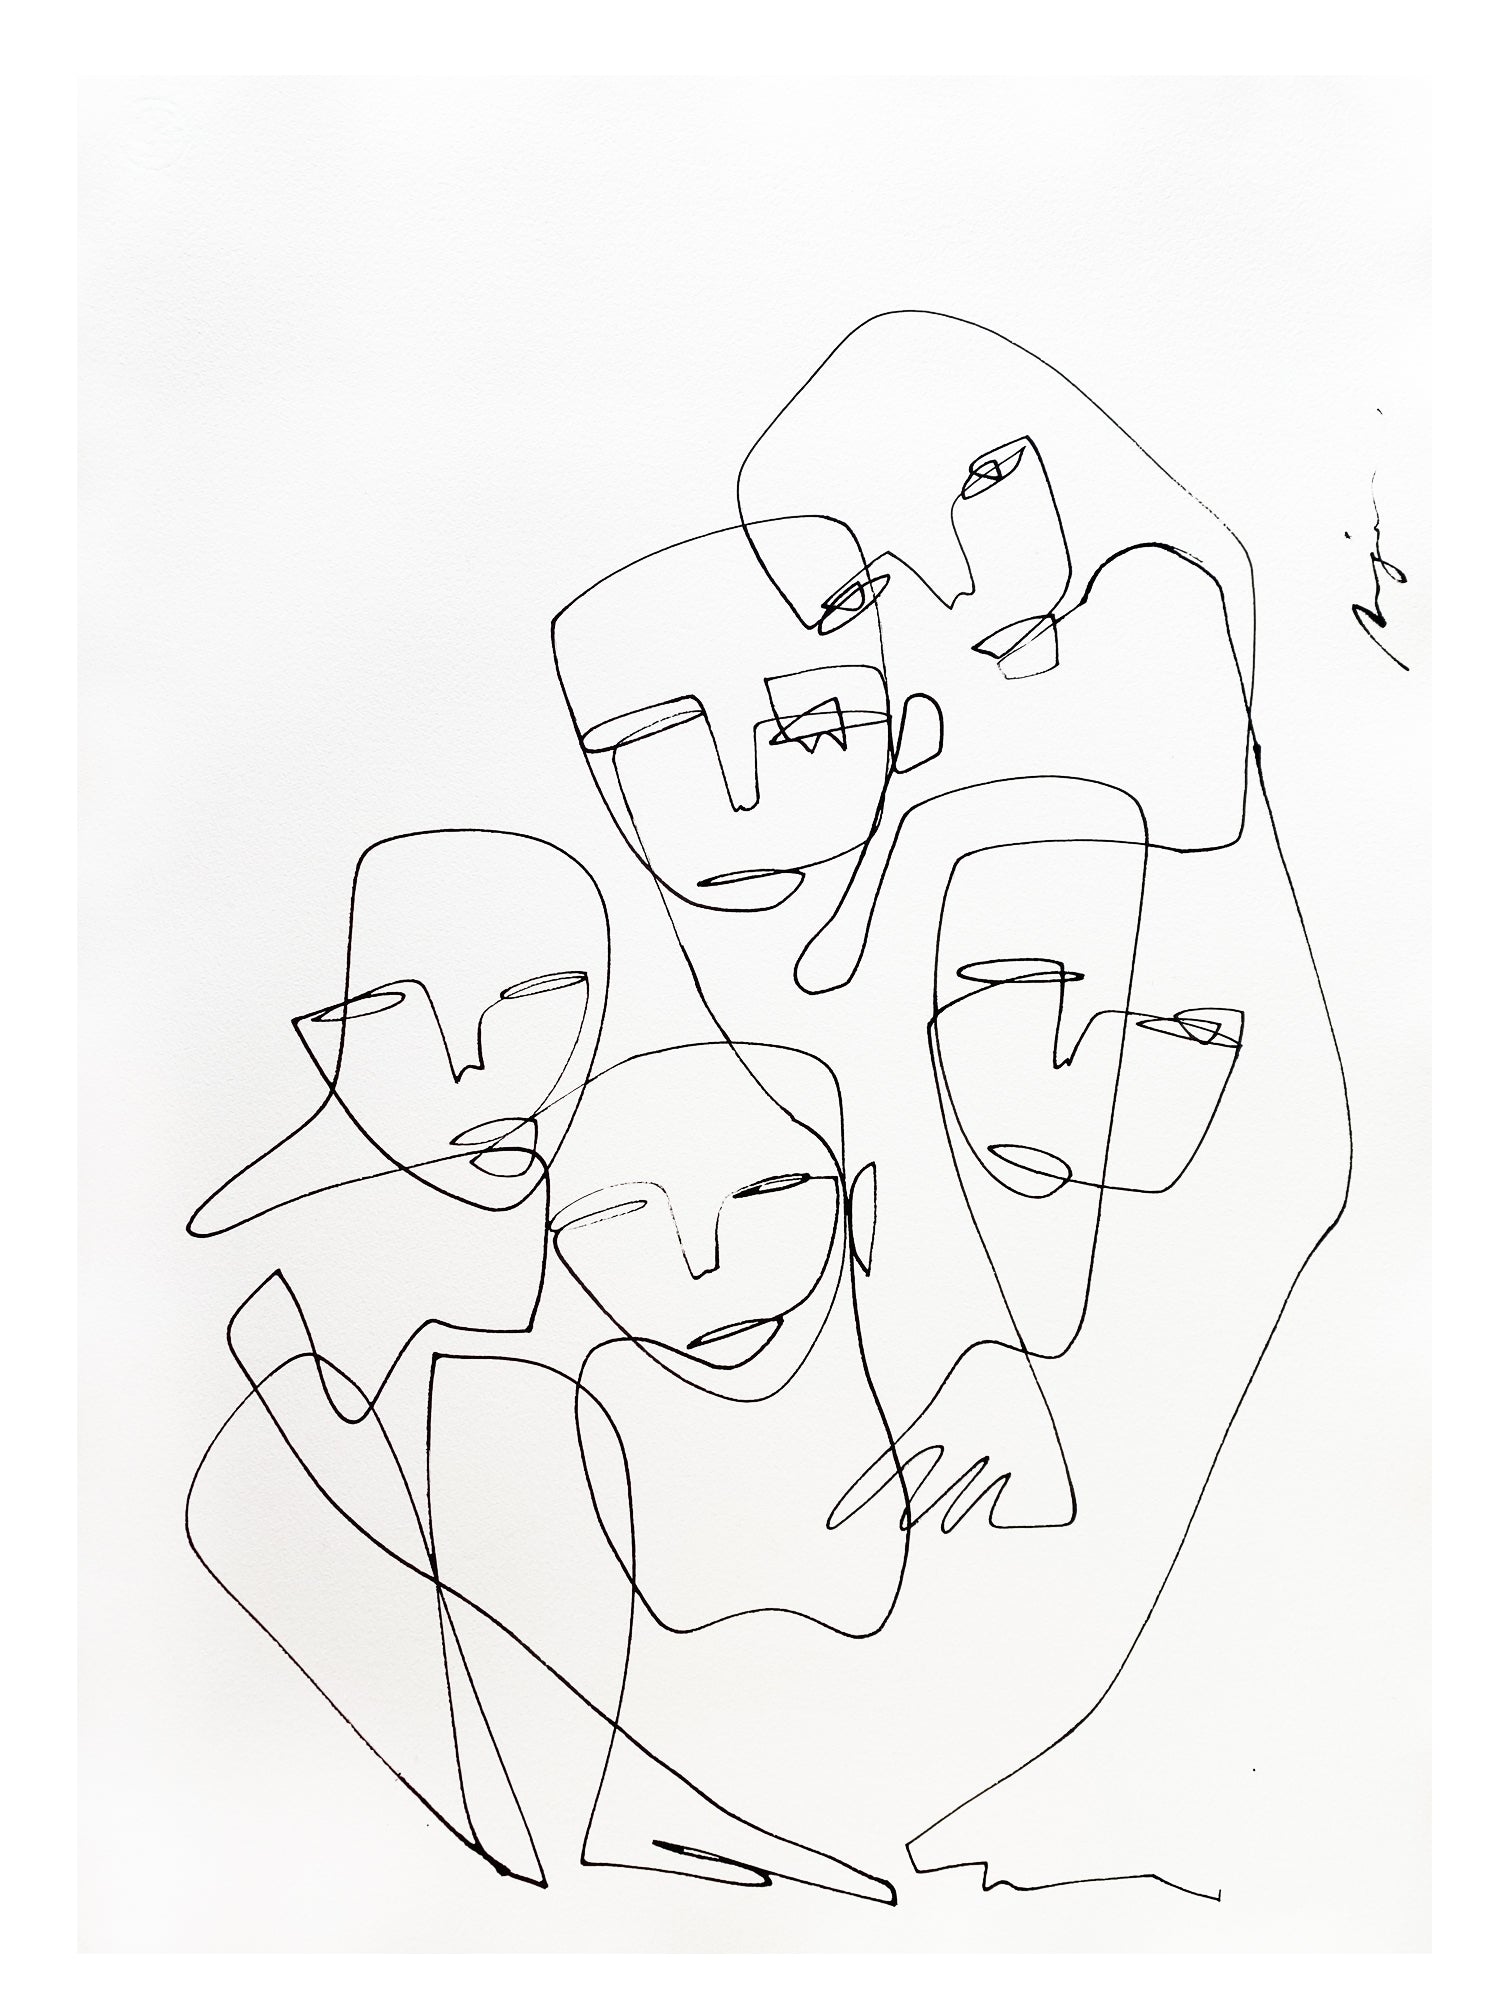 The Inseparable Five I One line I Medium